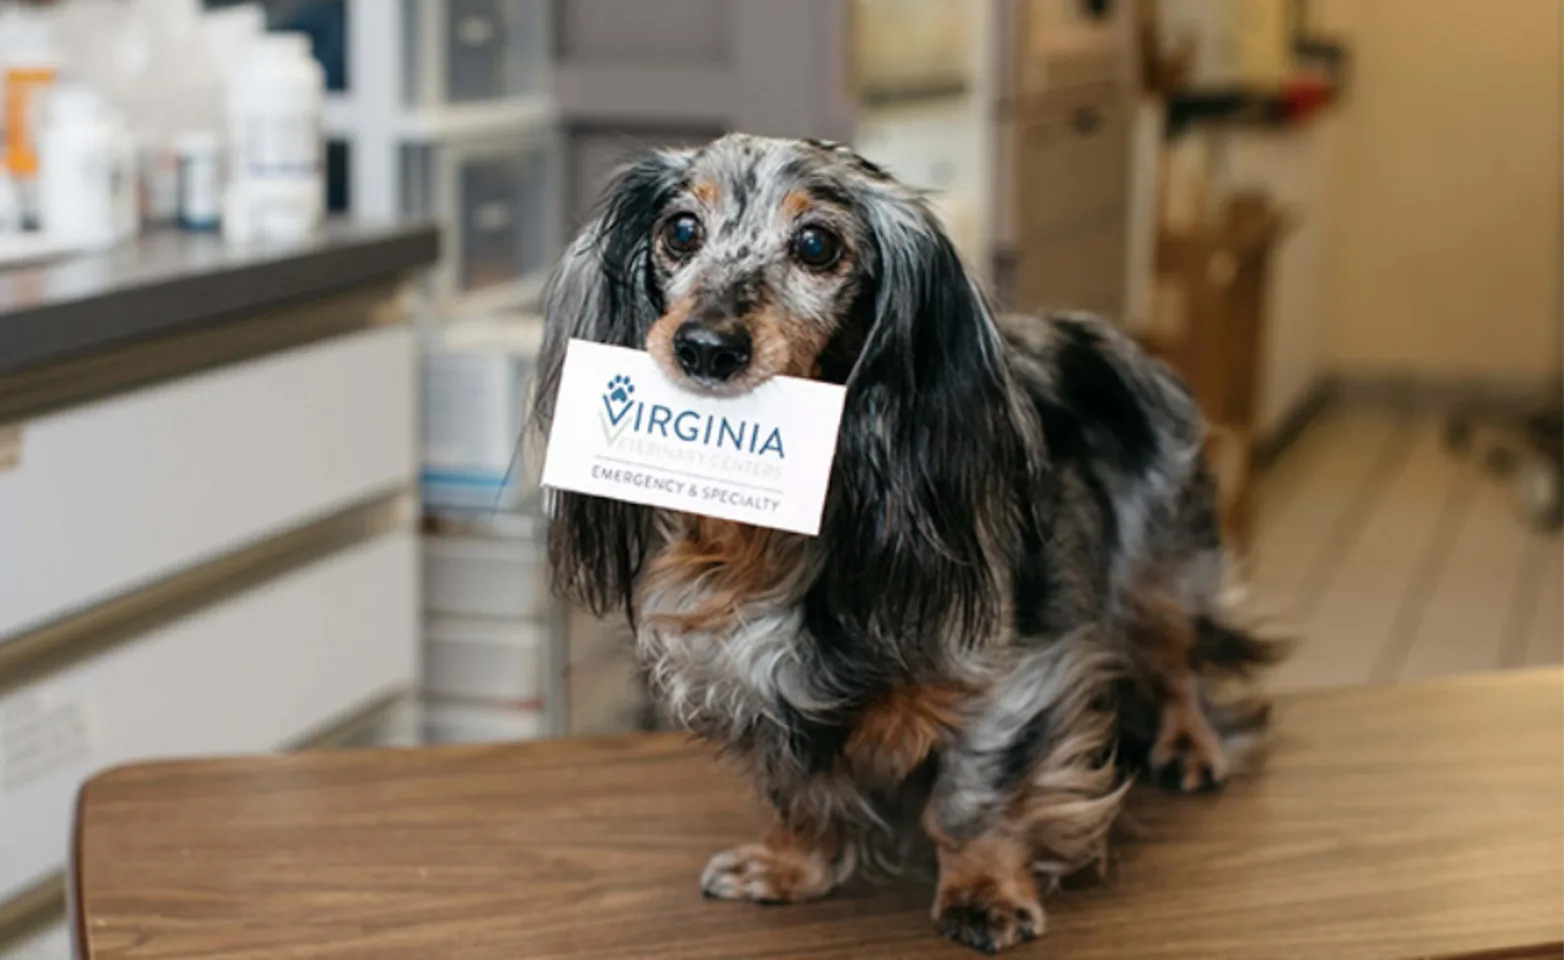 Speckled dachshund holding a business card in its mouth